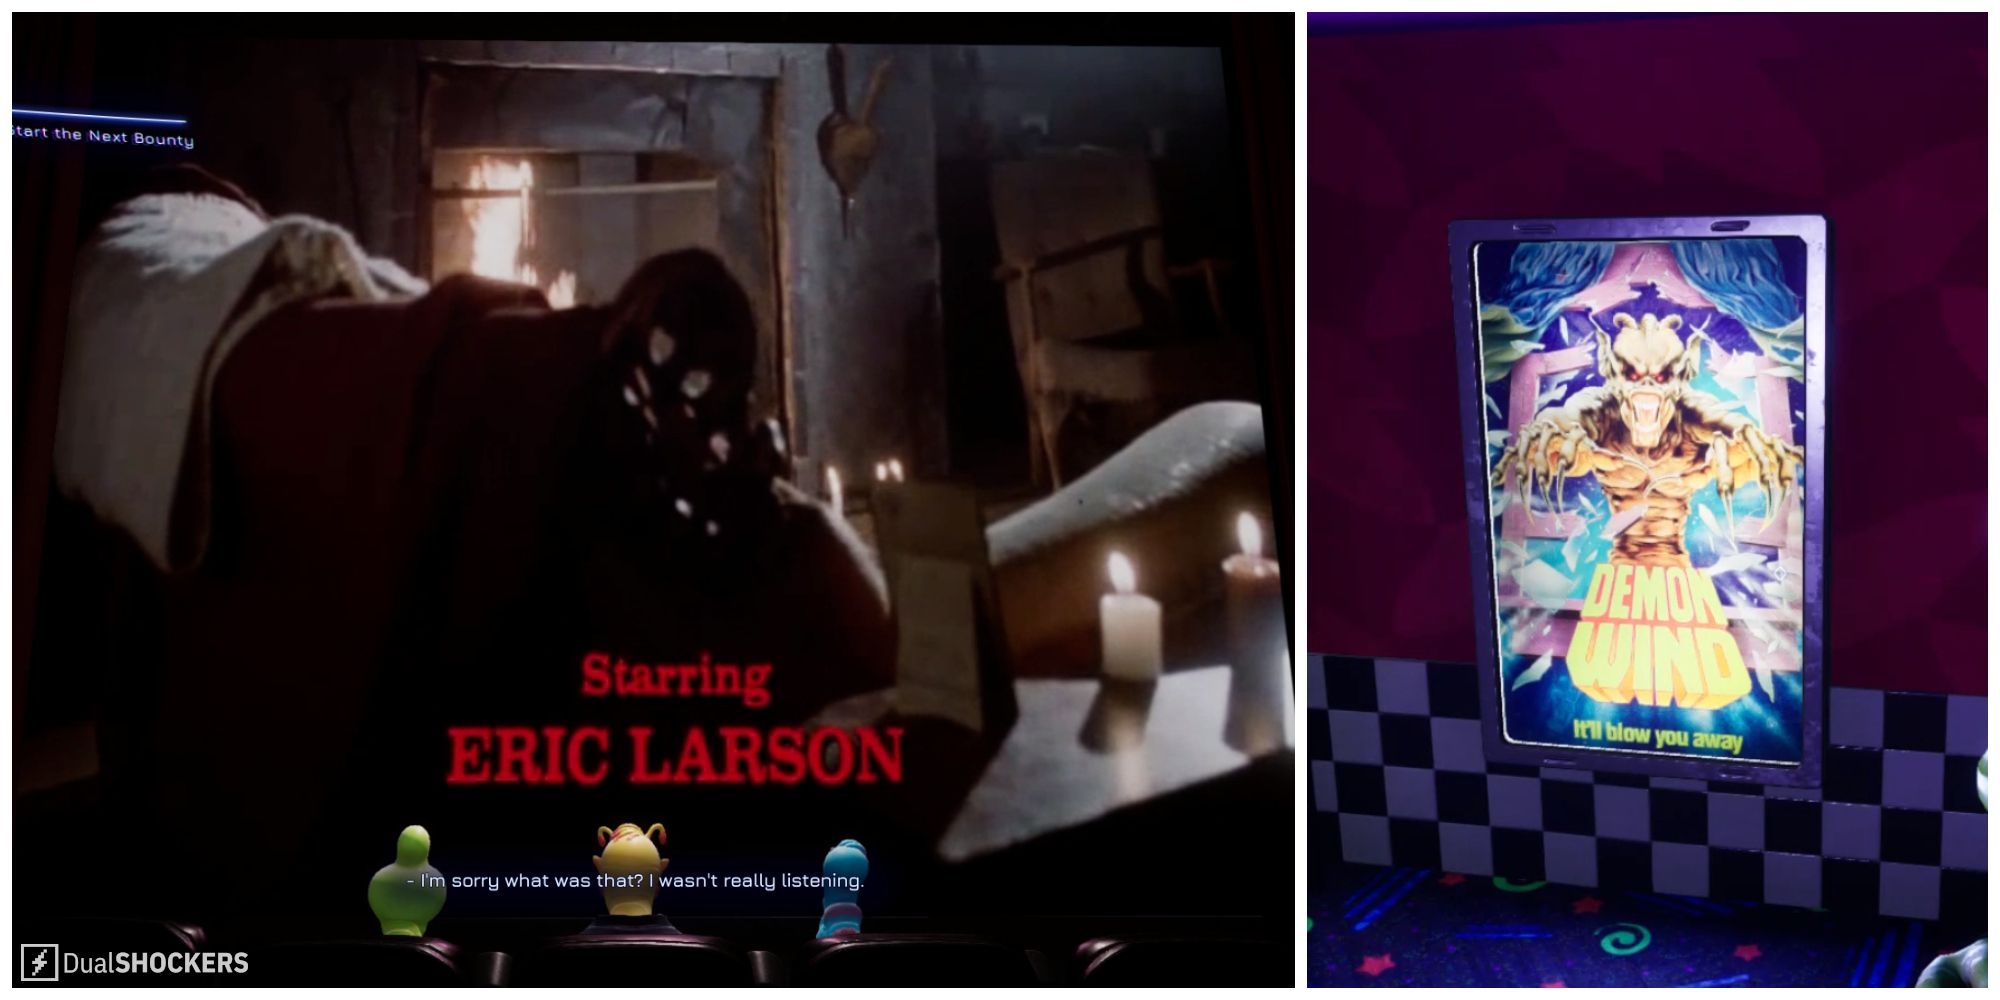 Split image of the movie Demon Wind playing in the movie theater and a poster for Demon Wind in High on Life.